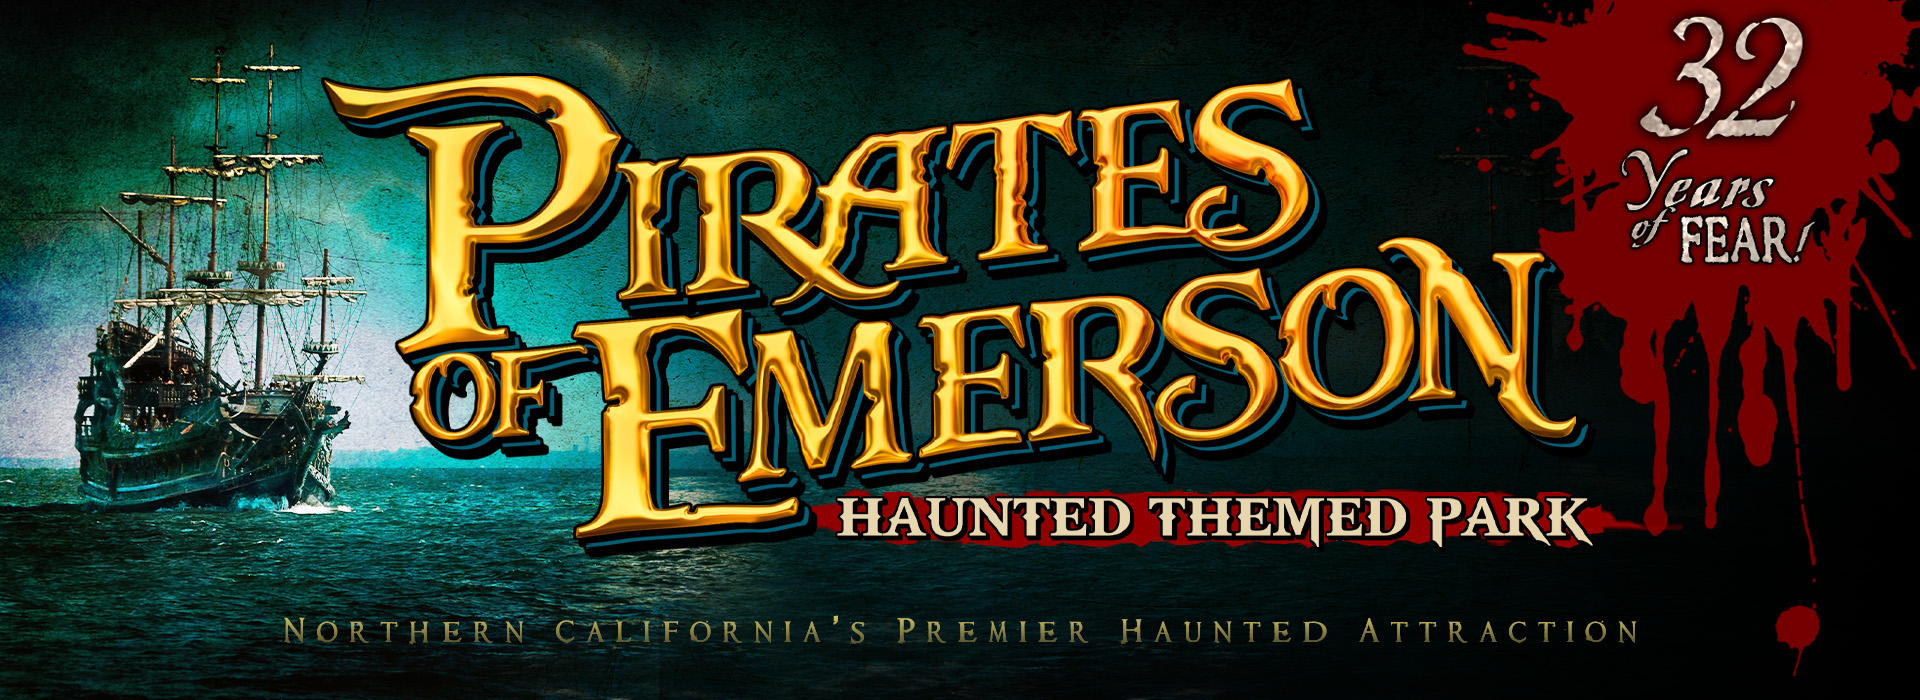 Pirates of Emerson Haunted Theme Park (Oct 17-20)